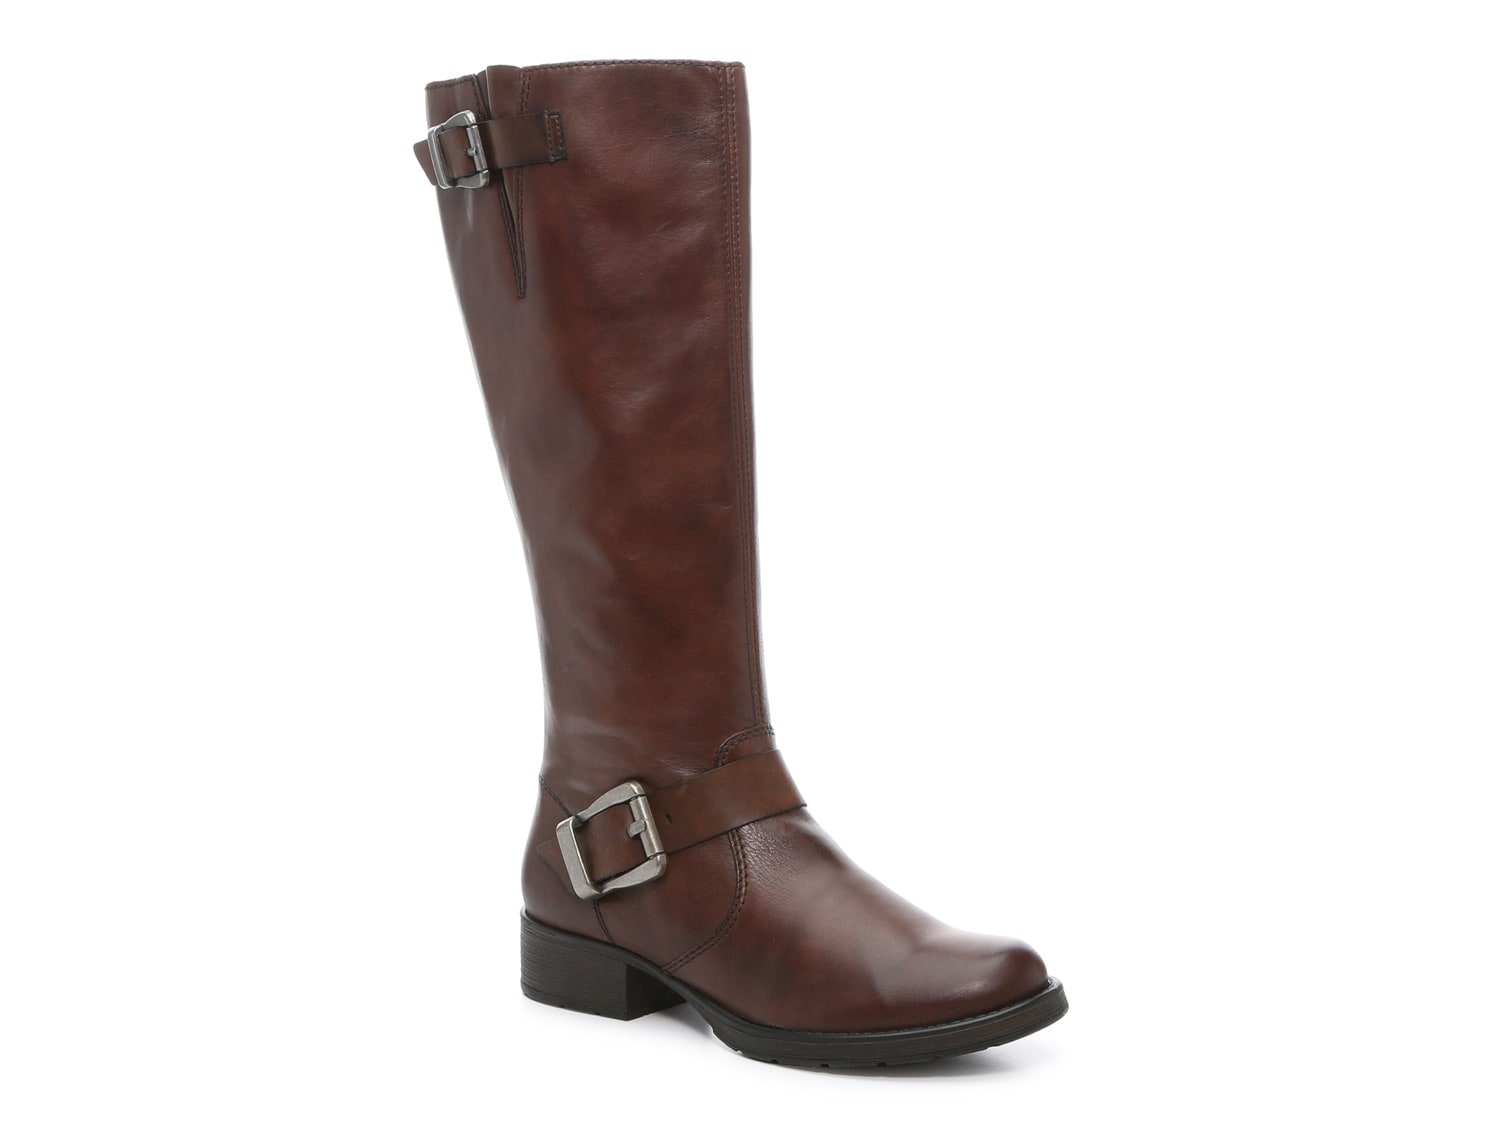 Rieker Faith 80 Riding Boot - Free Shipping | DSW